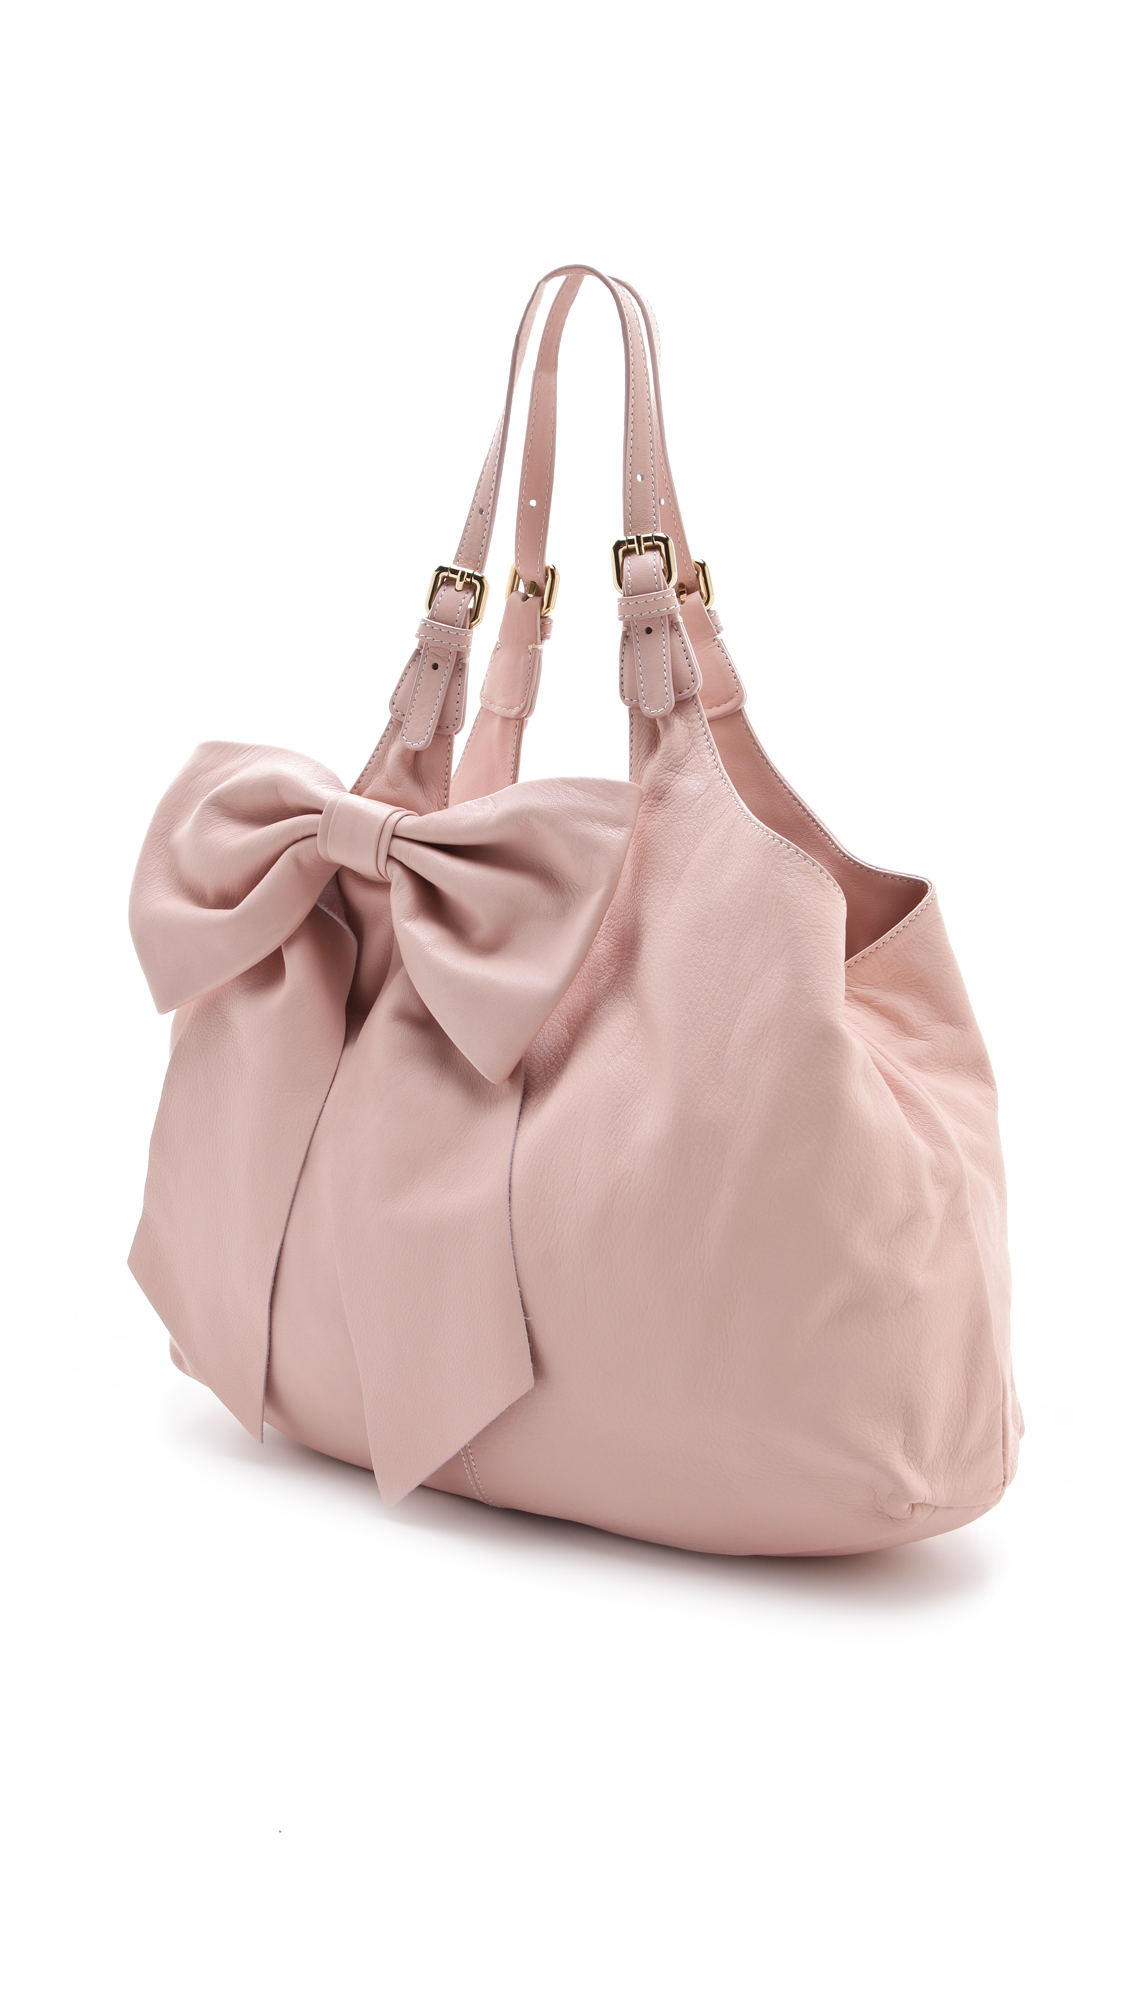 RED Valentino Bow Shoulder Bag in Pink - Lyst